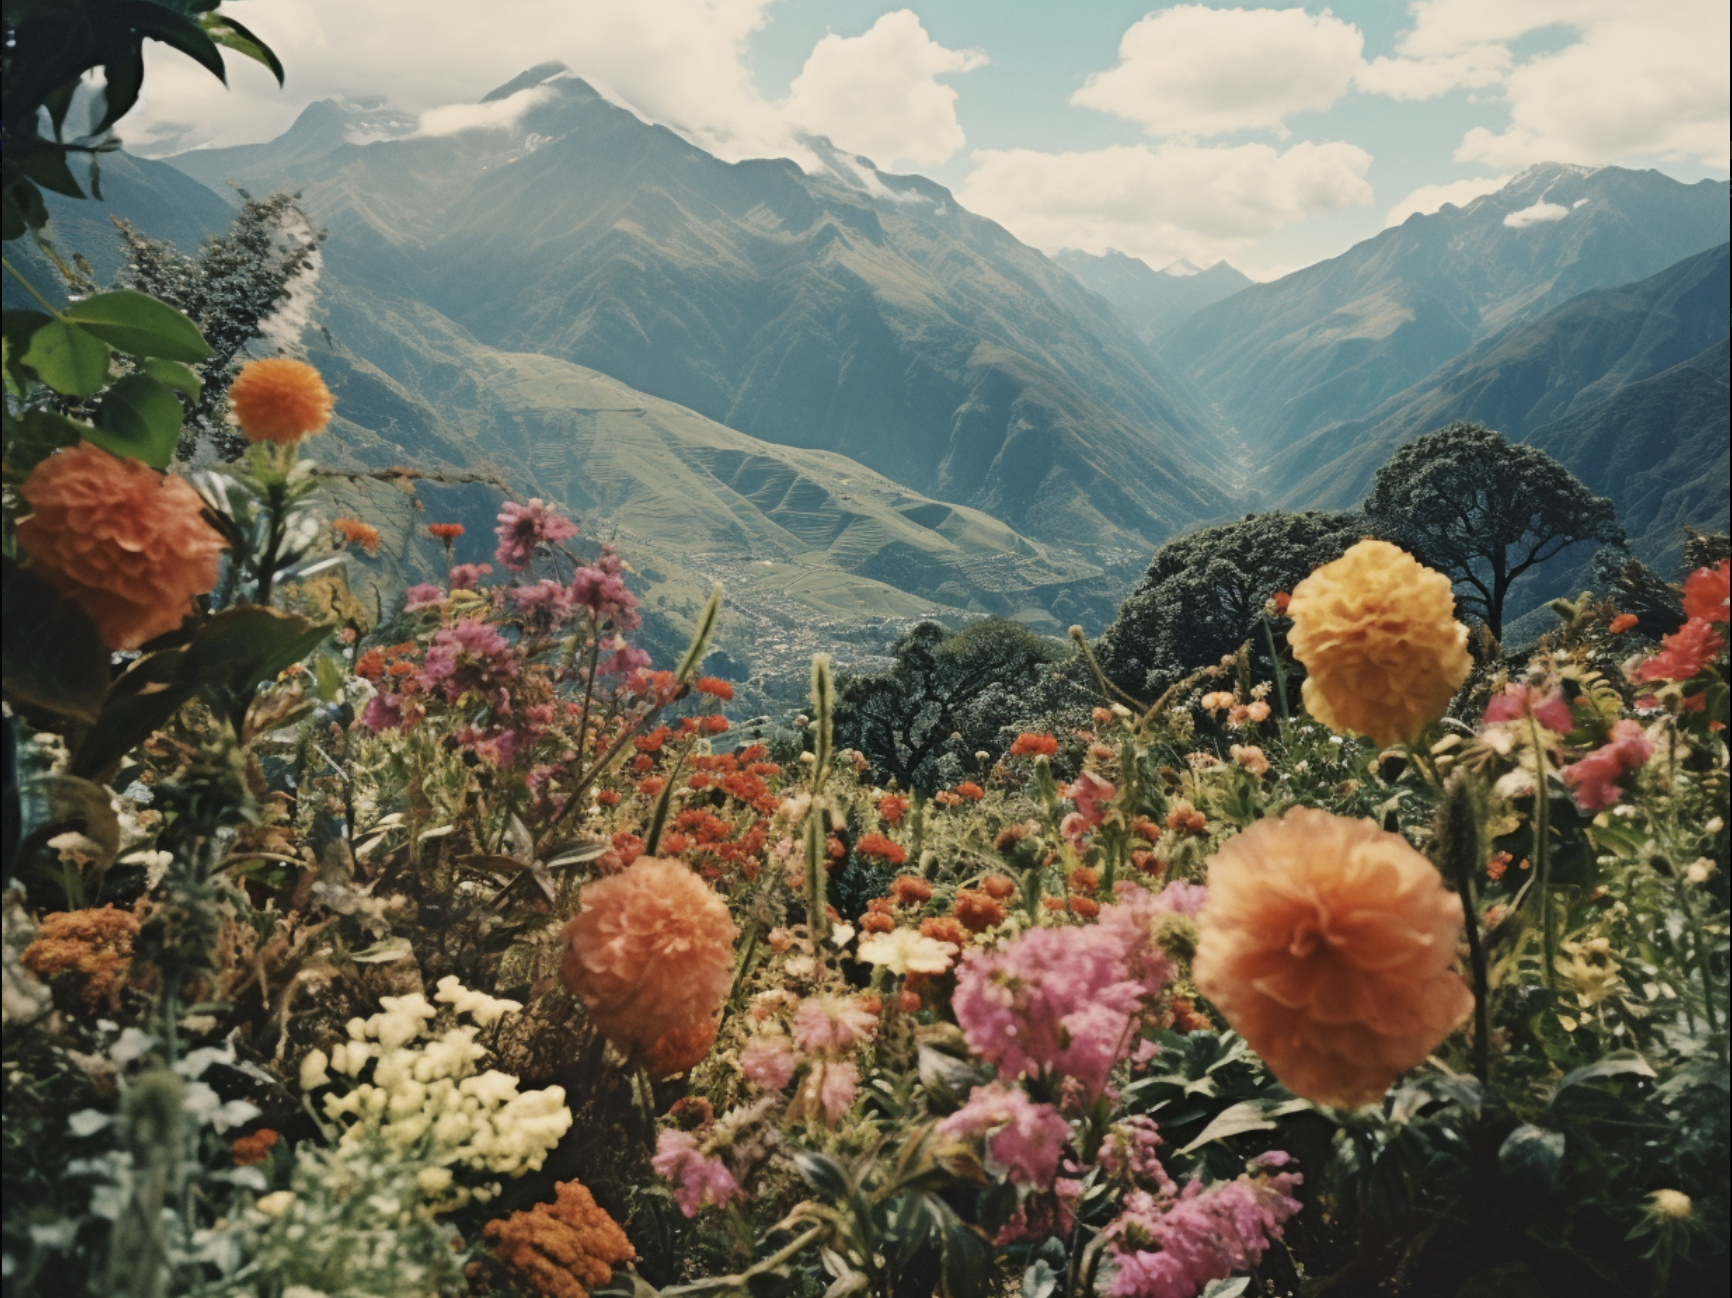 A Garden in the heart of the Andes